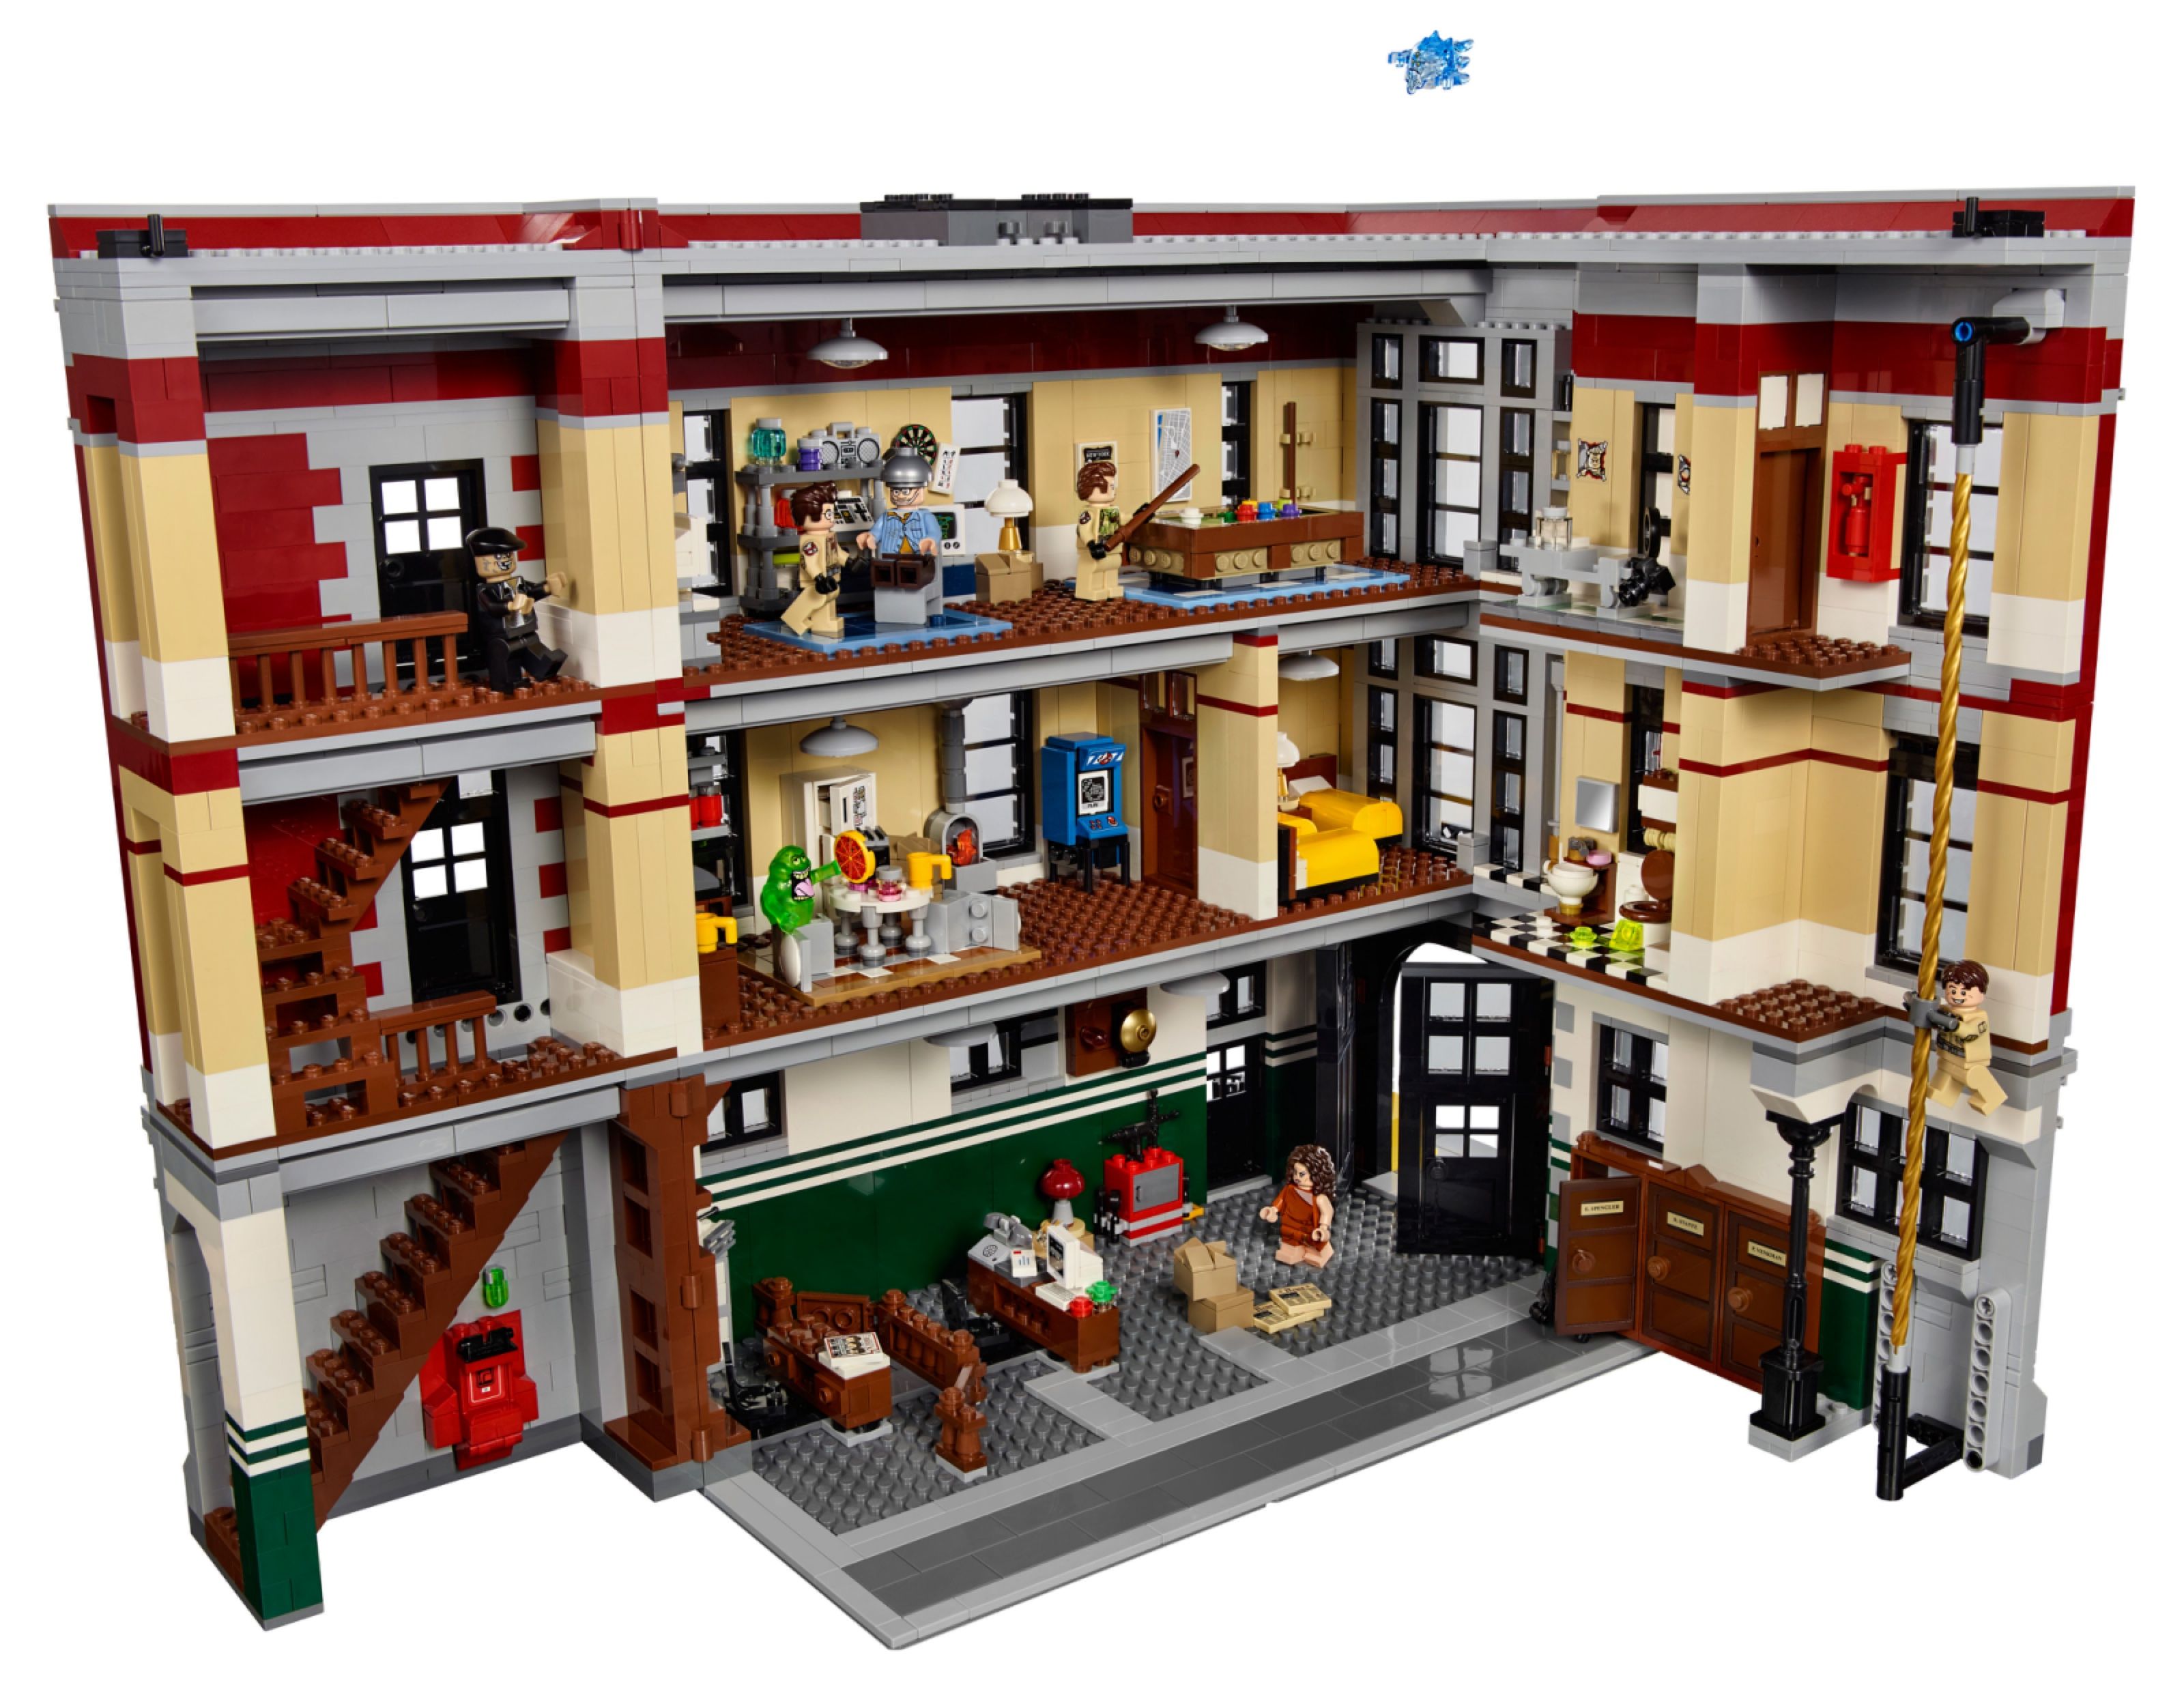 Epic Lego Sets Youll Want To Build image 3